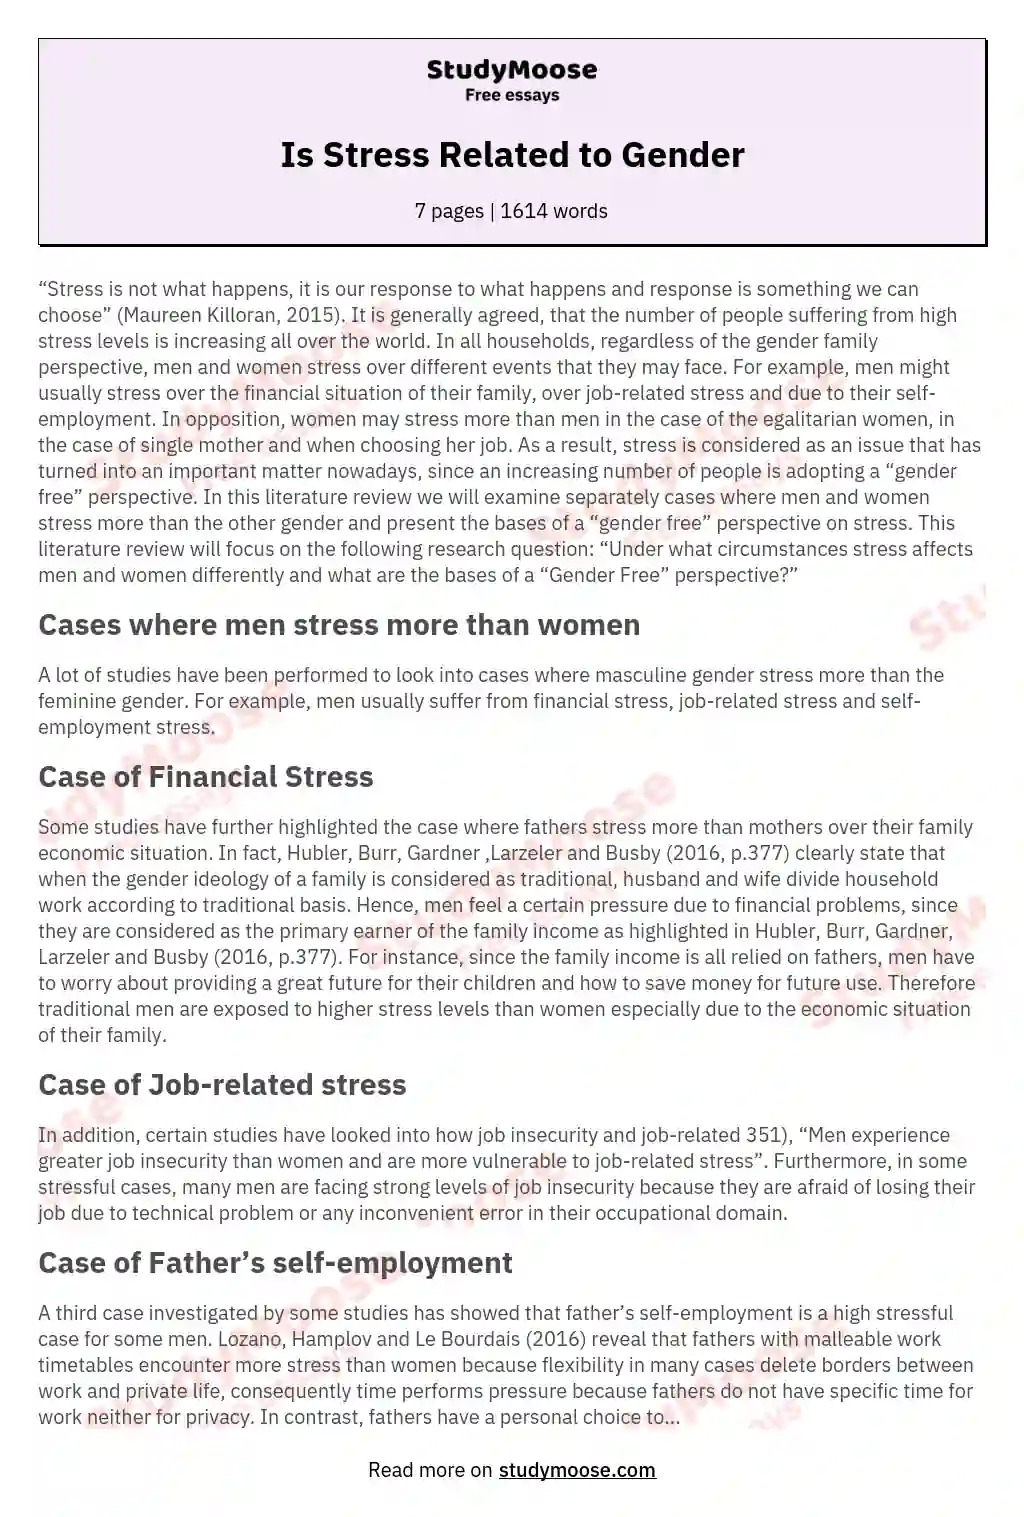 Is Stress Related to Gender essay